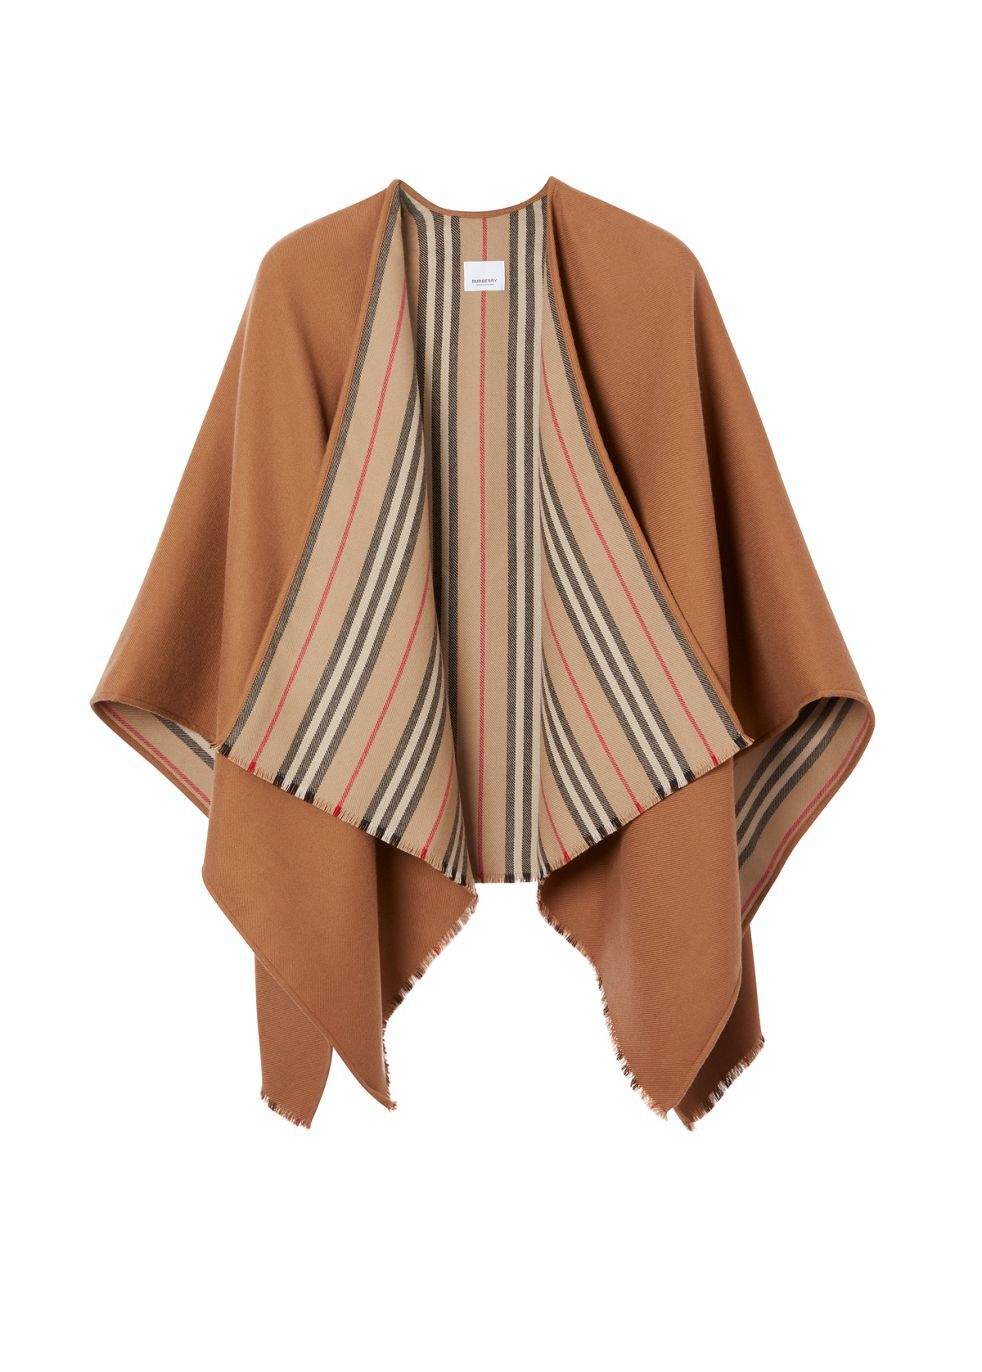 Burberry Reversible Icon Stripe Wool Cape Hats & Scarves | Heathrow Boutique